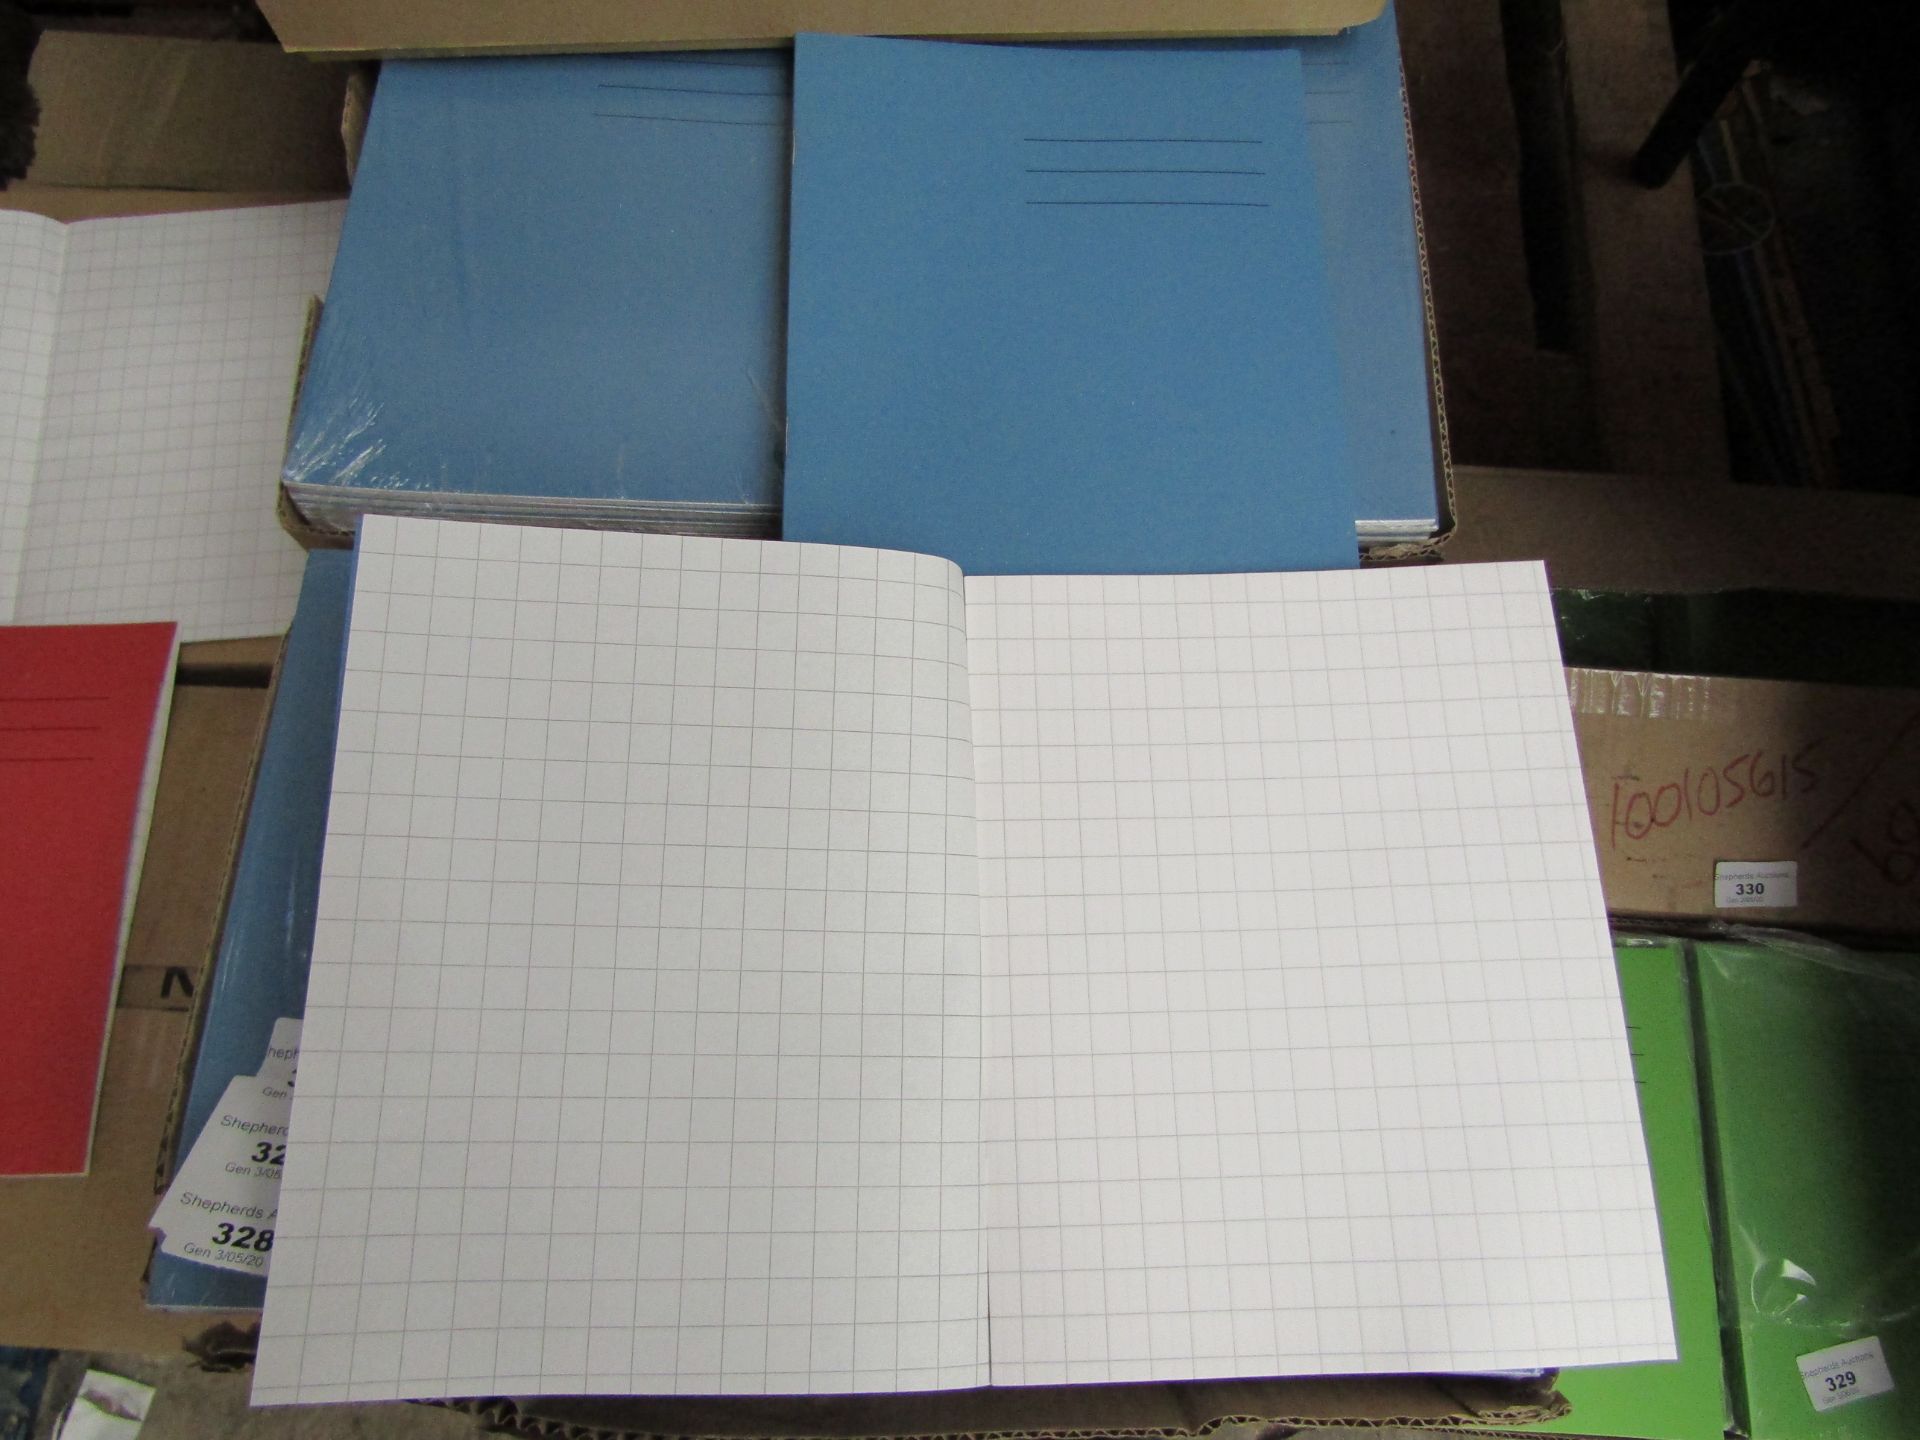 Box of 100 Exercise Books. New & Boxed. See image for design